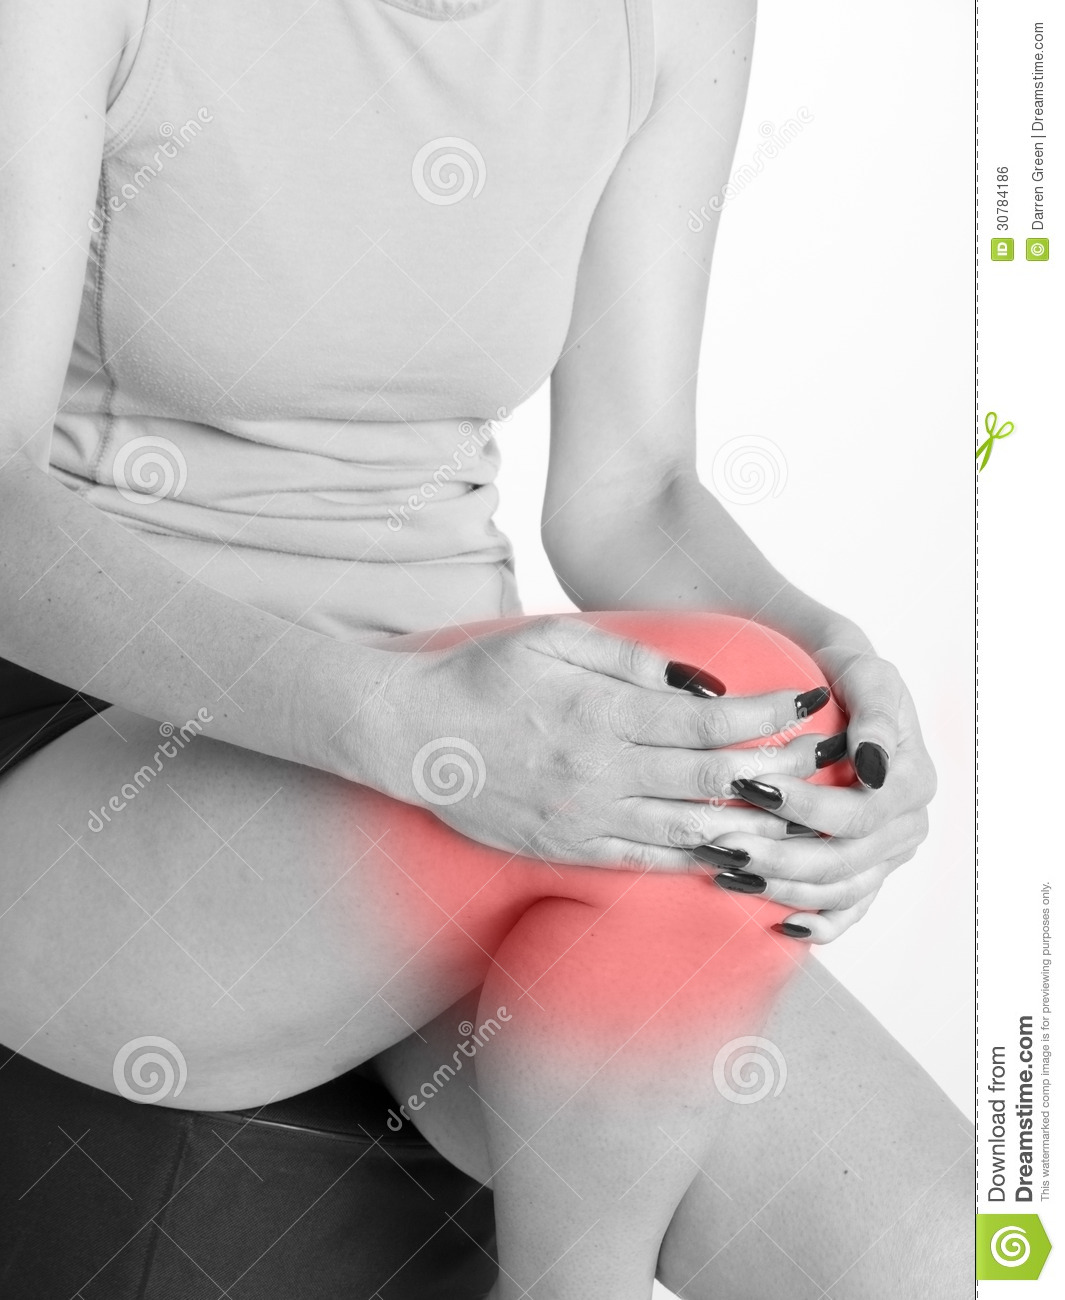 Woman With Knee Joint Pain Royalty Free Stock Image   Image  30784186